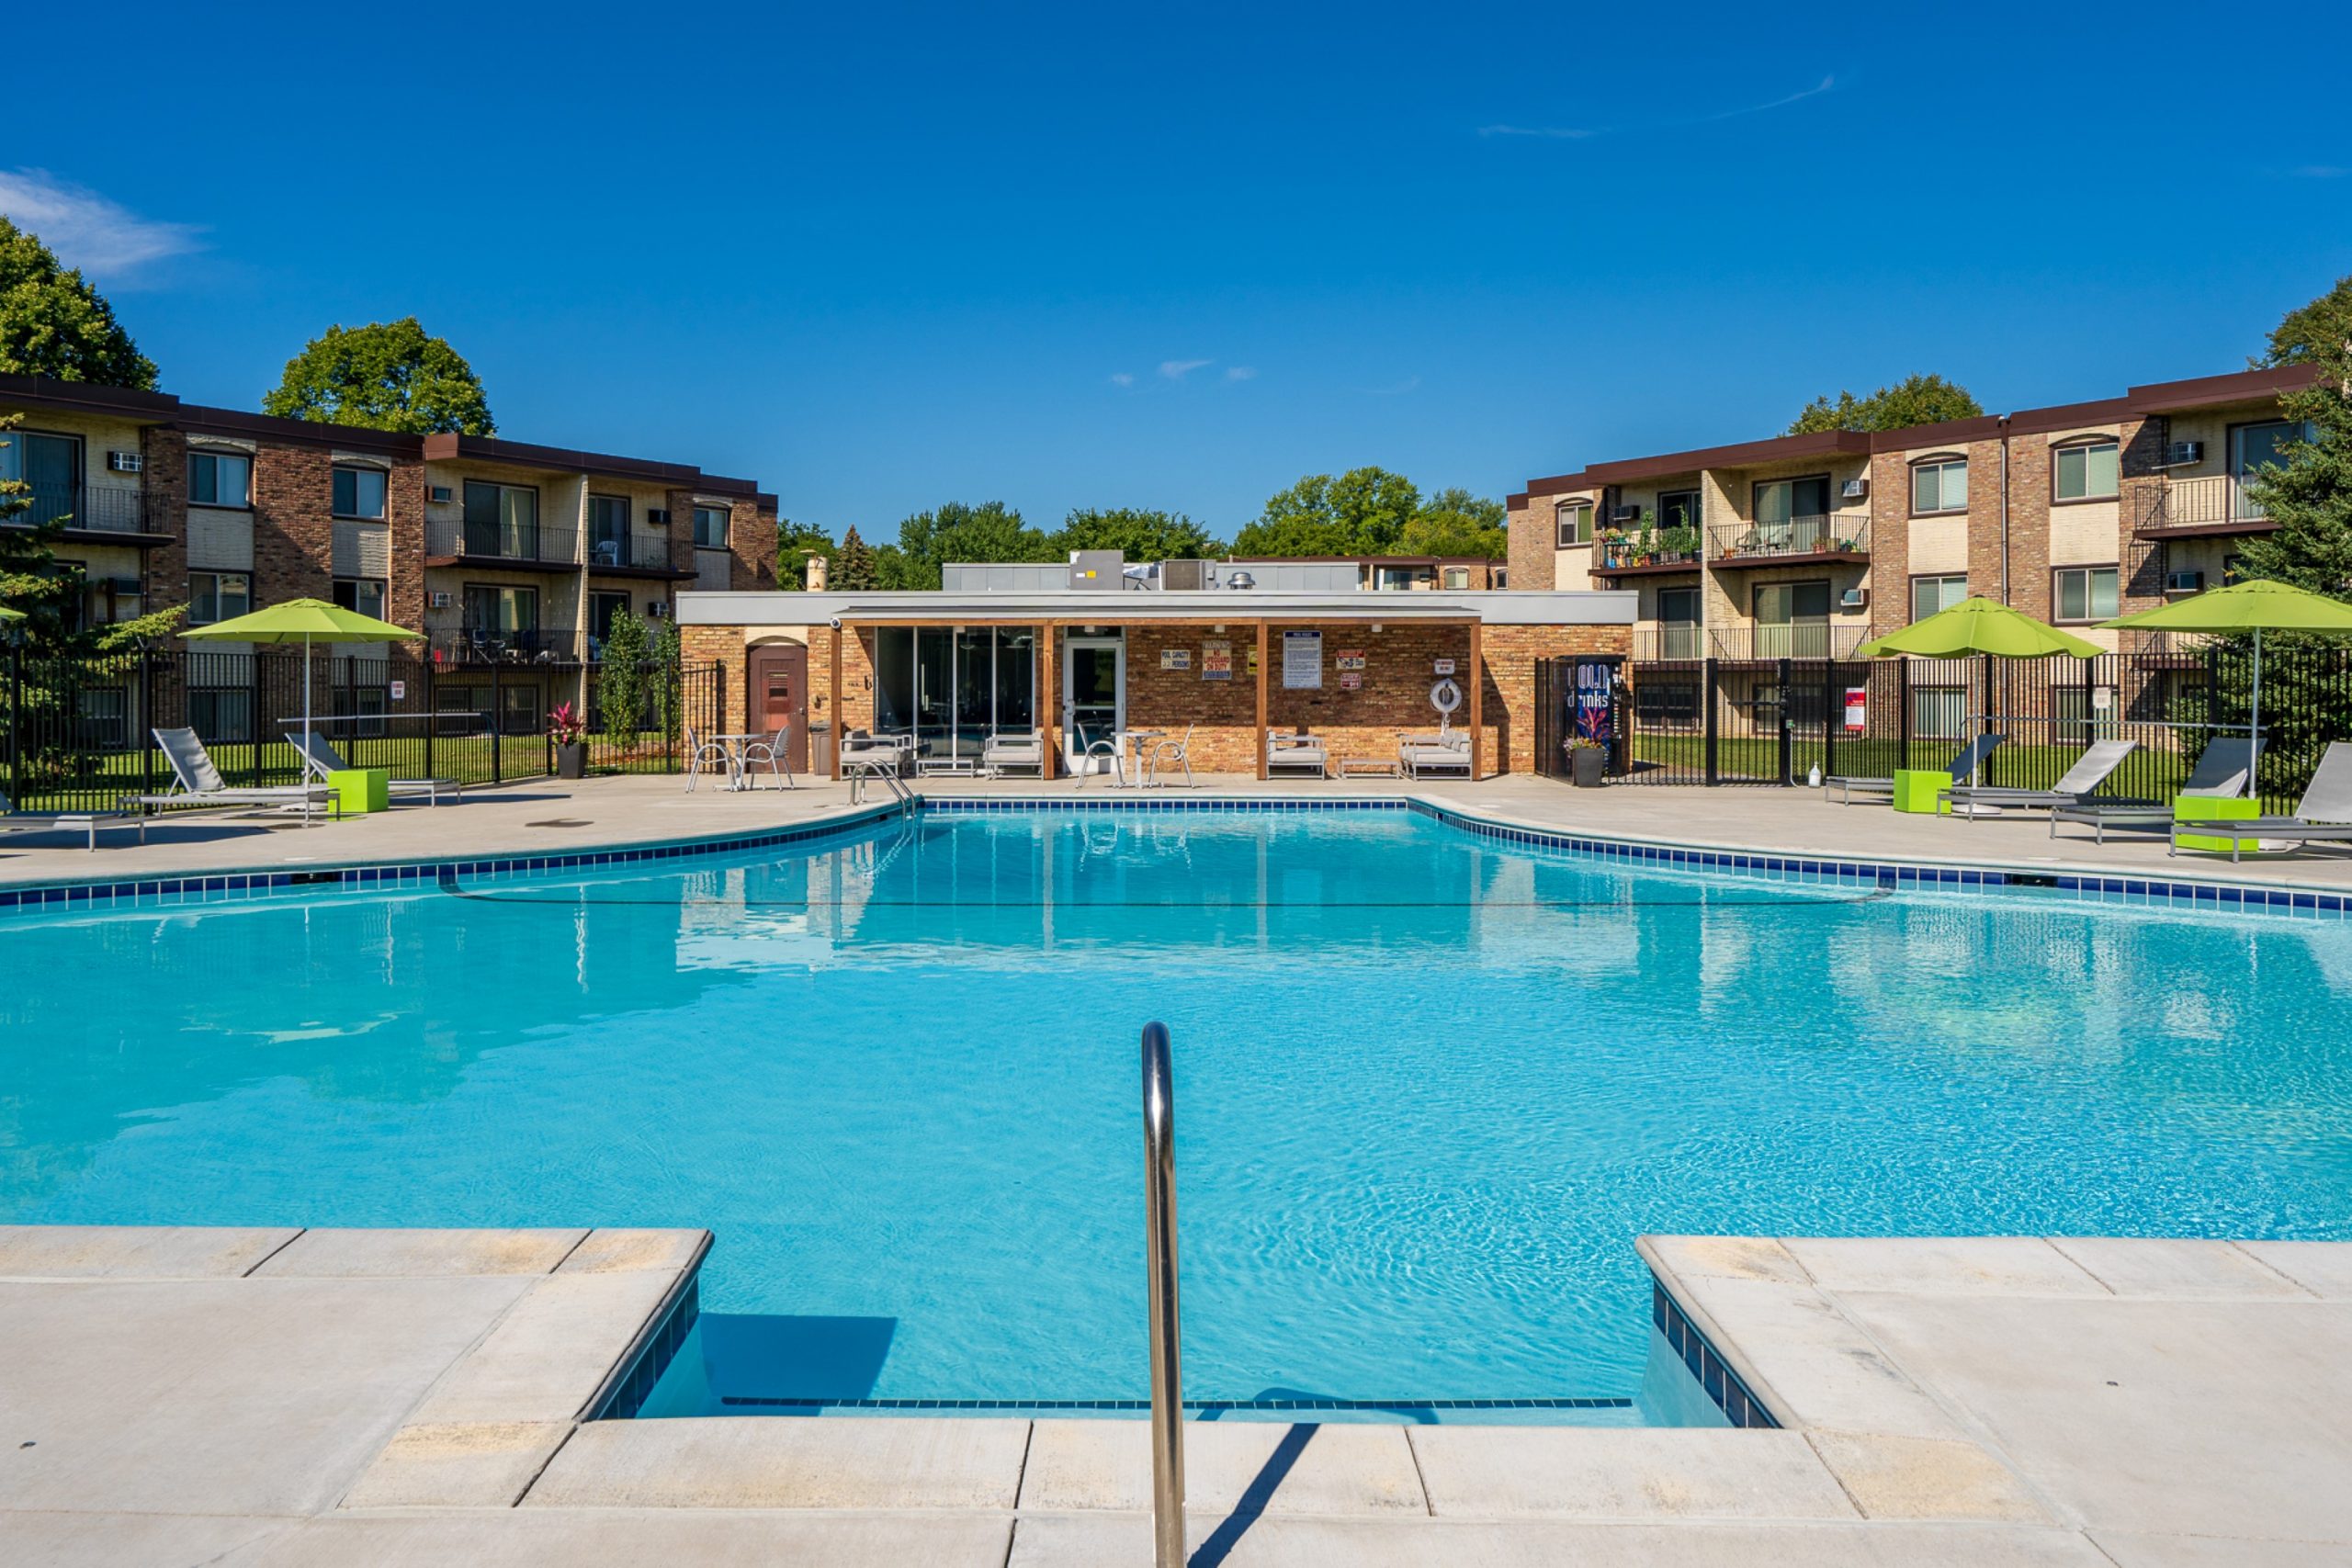 Outdoor Pool At Sumter Green Apartments In Crystal, MN